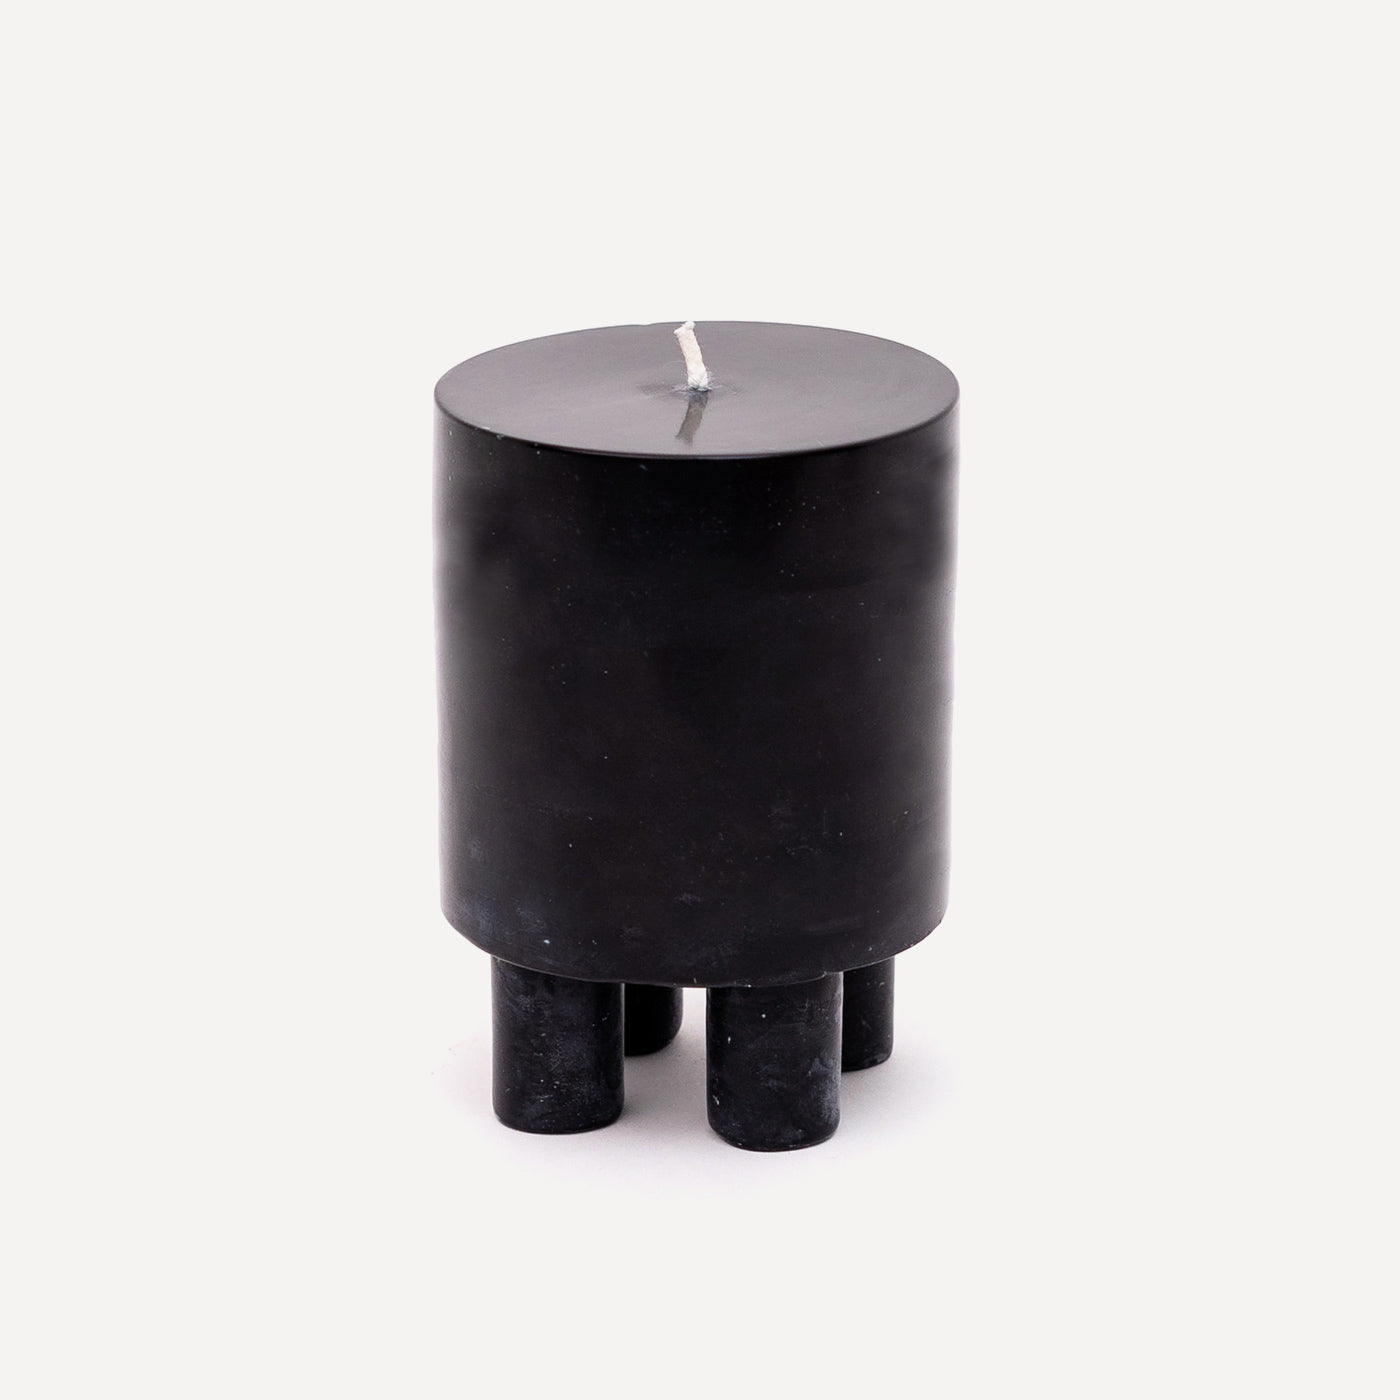 Stack Candle Prop, shaped candles by Yod and co in black